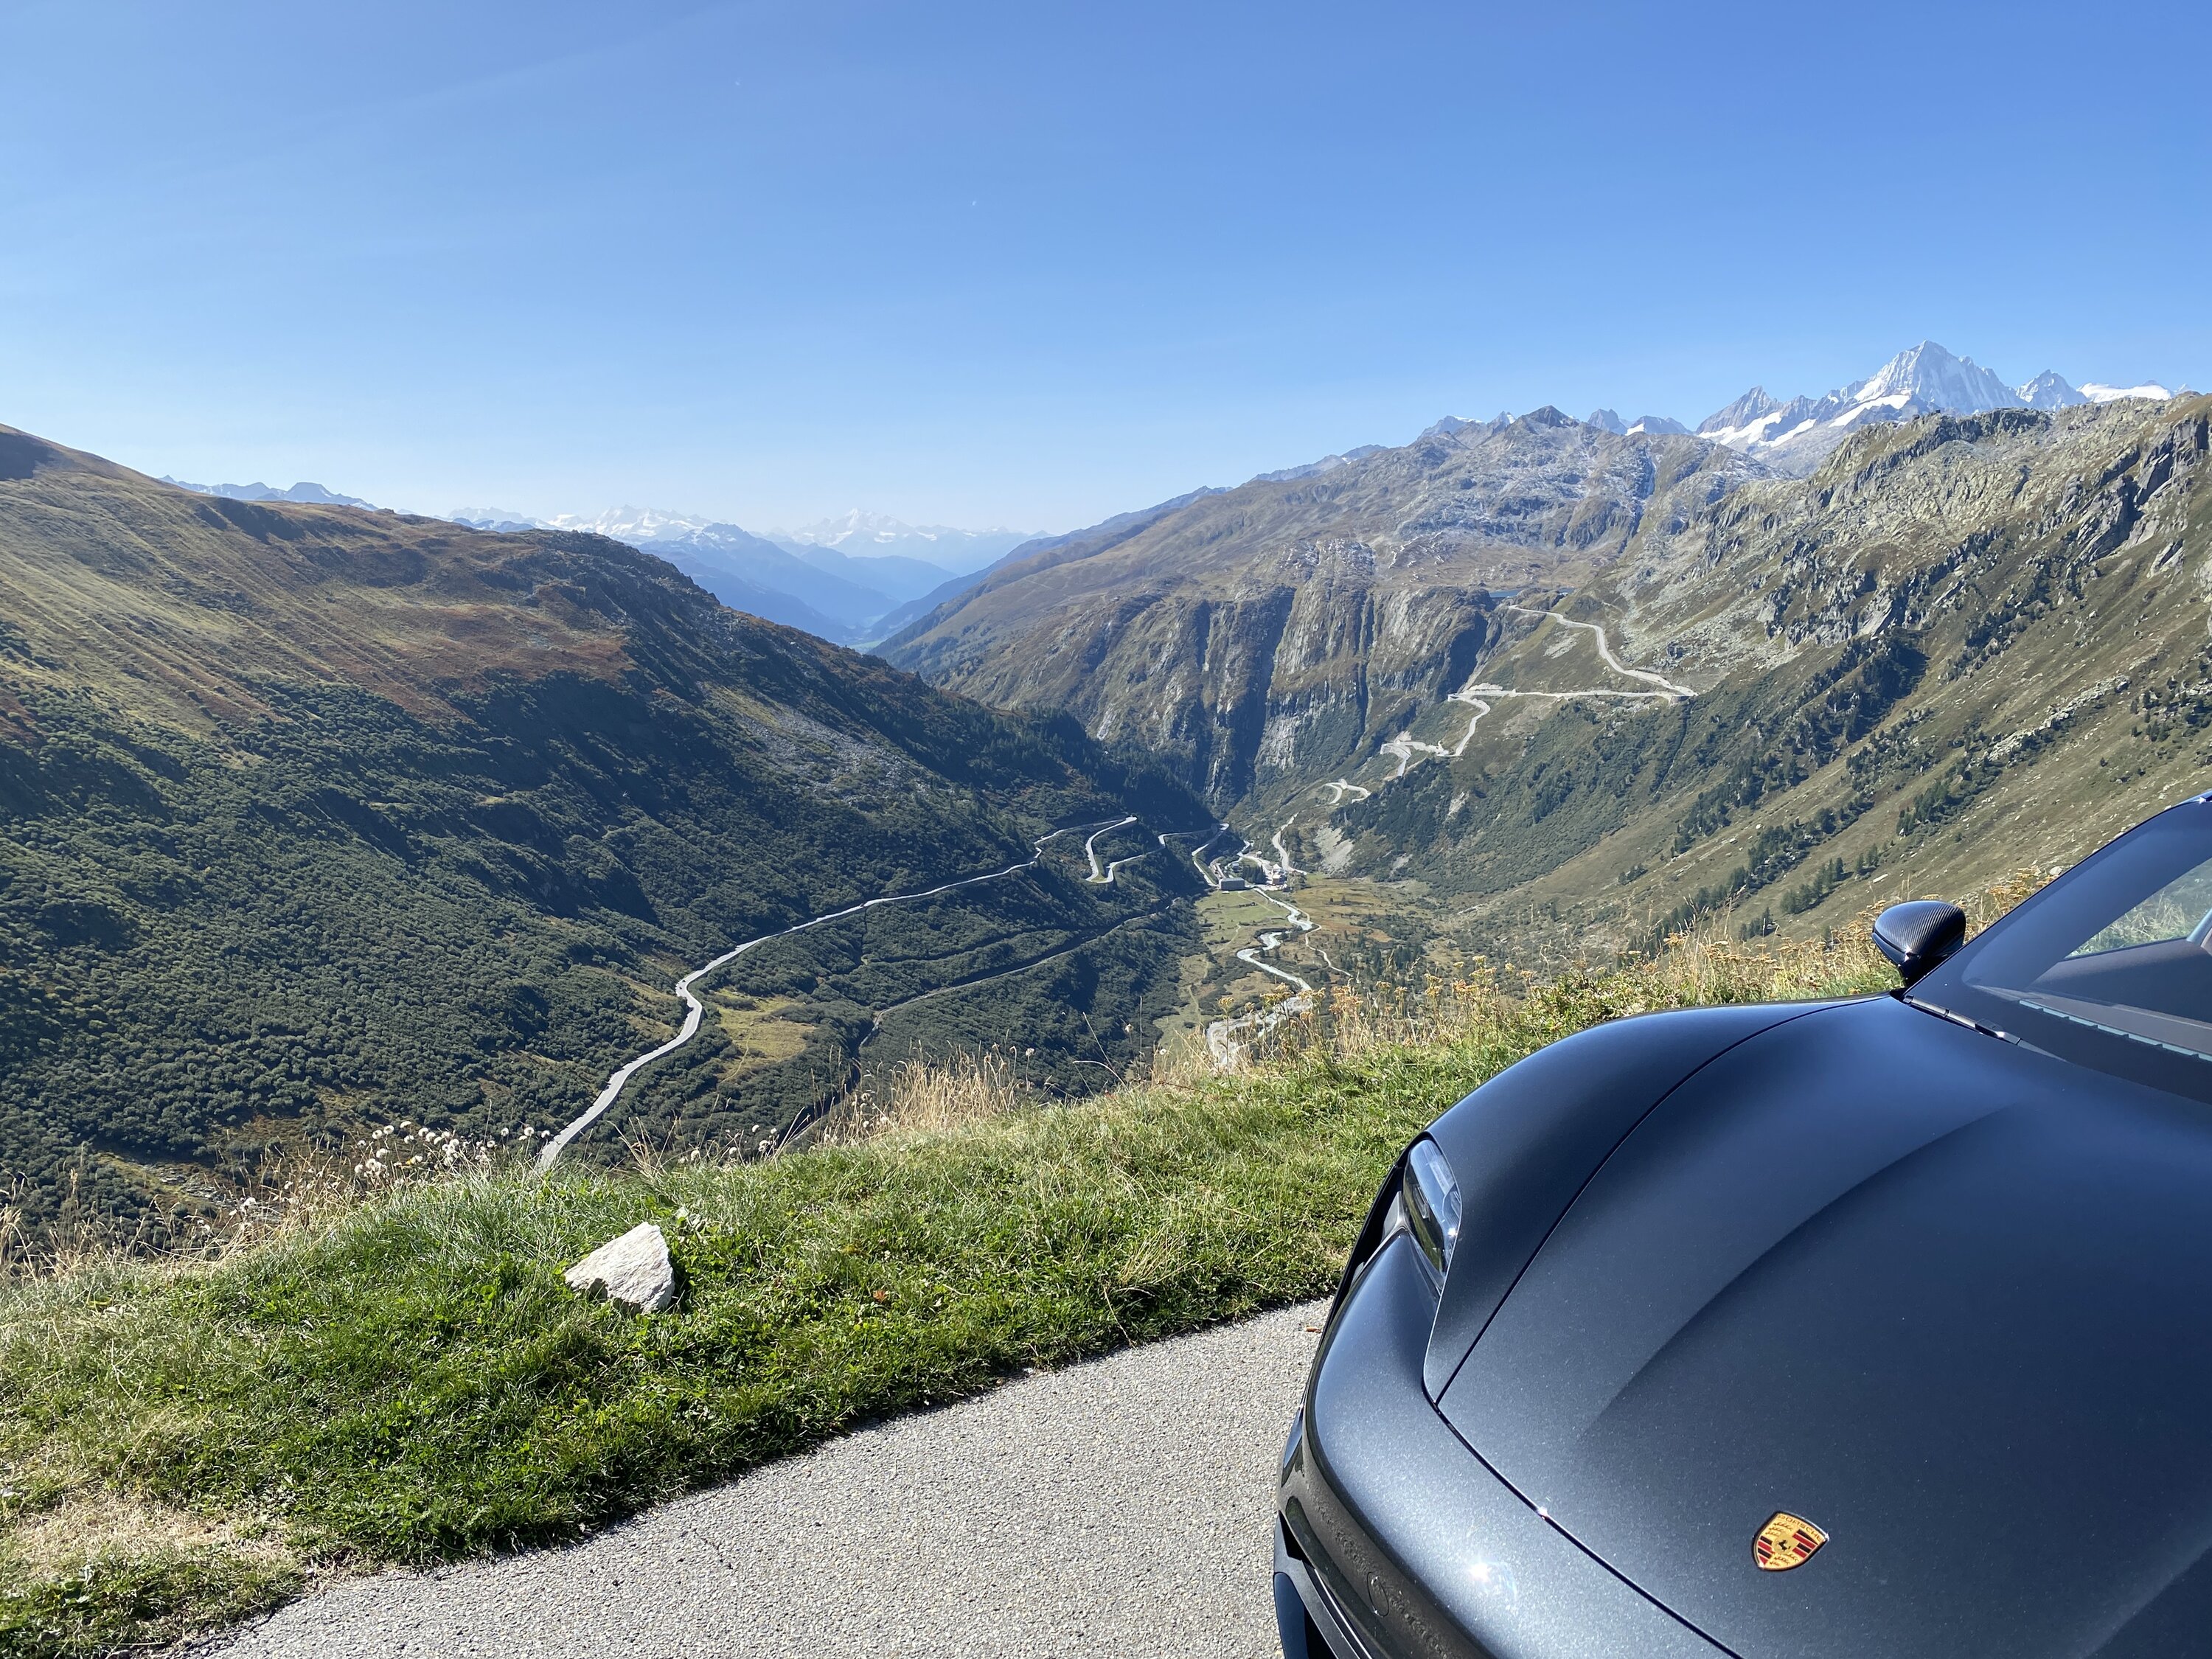 Porsche Taycan Location! Location! Location!  Post Artistic Photos of Your Taycan with Scenery Pass1.JPG